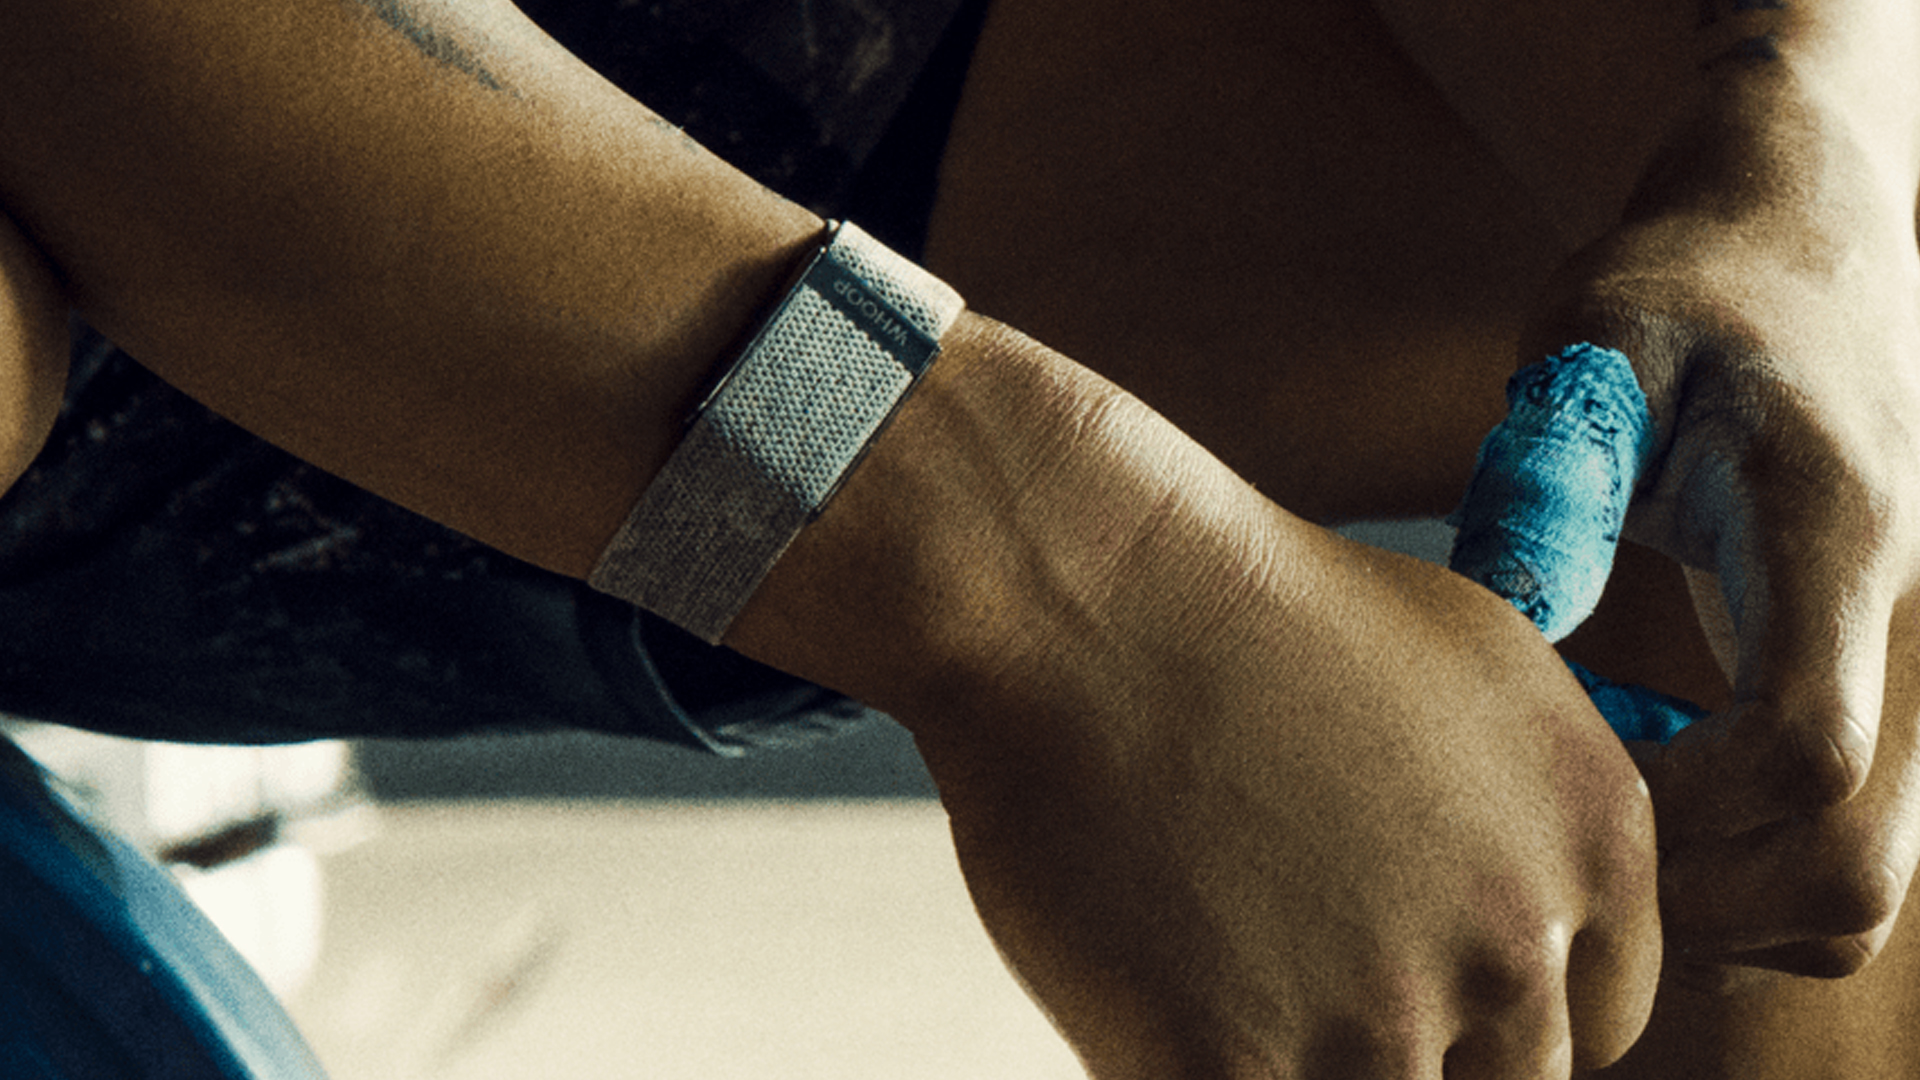 The whoop 4. 0 fitness tracker in band form.